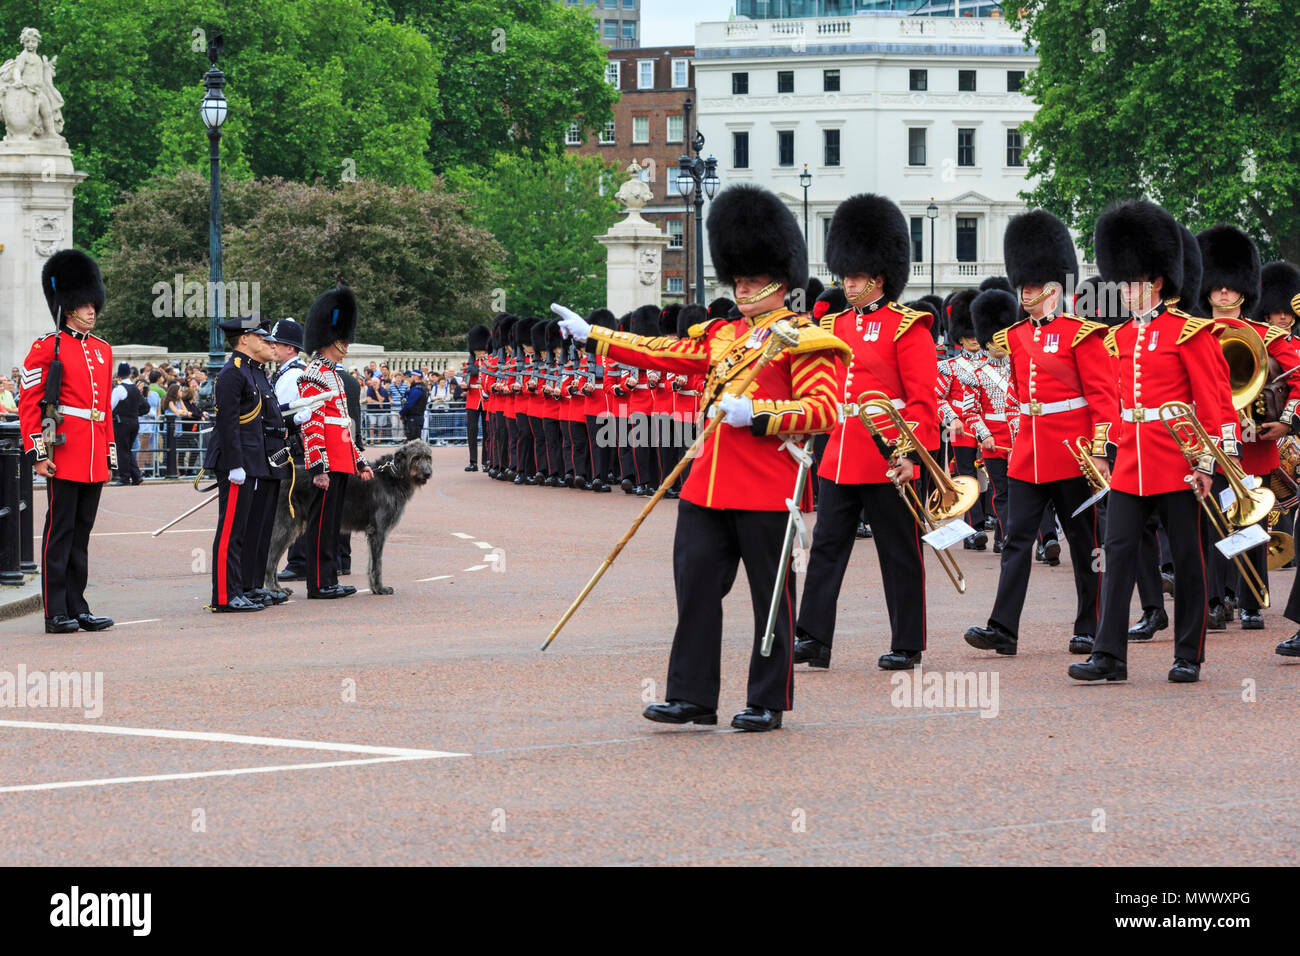 London, UK. 2nd June 2018. Domhnall, a beautiful Irish Wolfhound, is and official mascot and member of the Irish Guards. Londoners and tourists enjoy watching the procession and display of pageantry by troops from the Household Division at The Colonel's Review of Trooping the Colour on the Mall in Westminster. The Colonel's Review is the second and final full public rehearsal of Trooping the Colour, one week before the Queen's Birthday Parade. It takes place along The Mall and at Horse Guards Parade. Credit: Imageplotter News and Sports/Alamy Live News Stock Photo